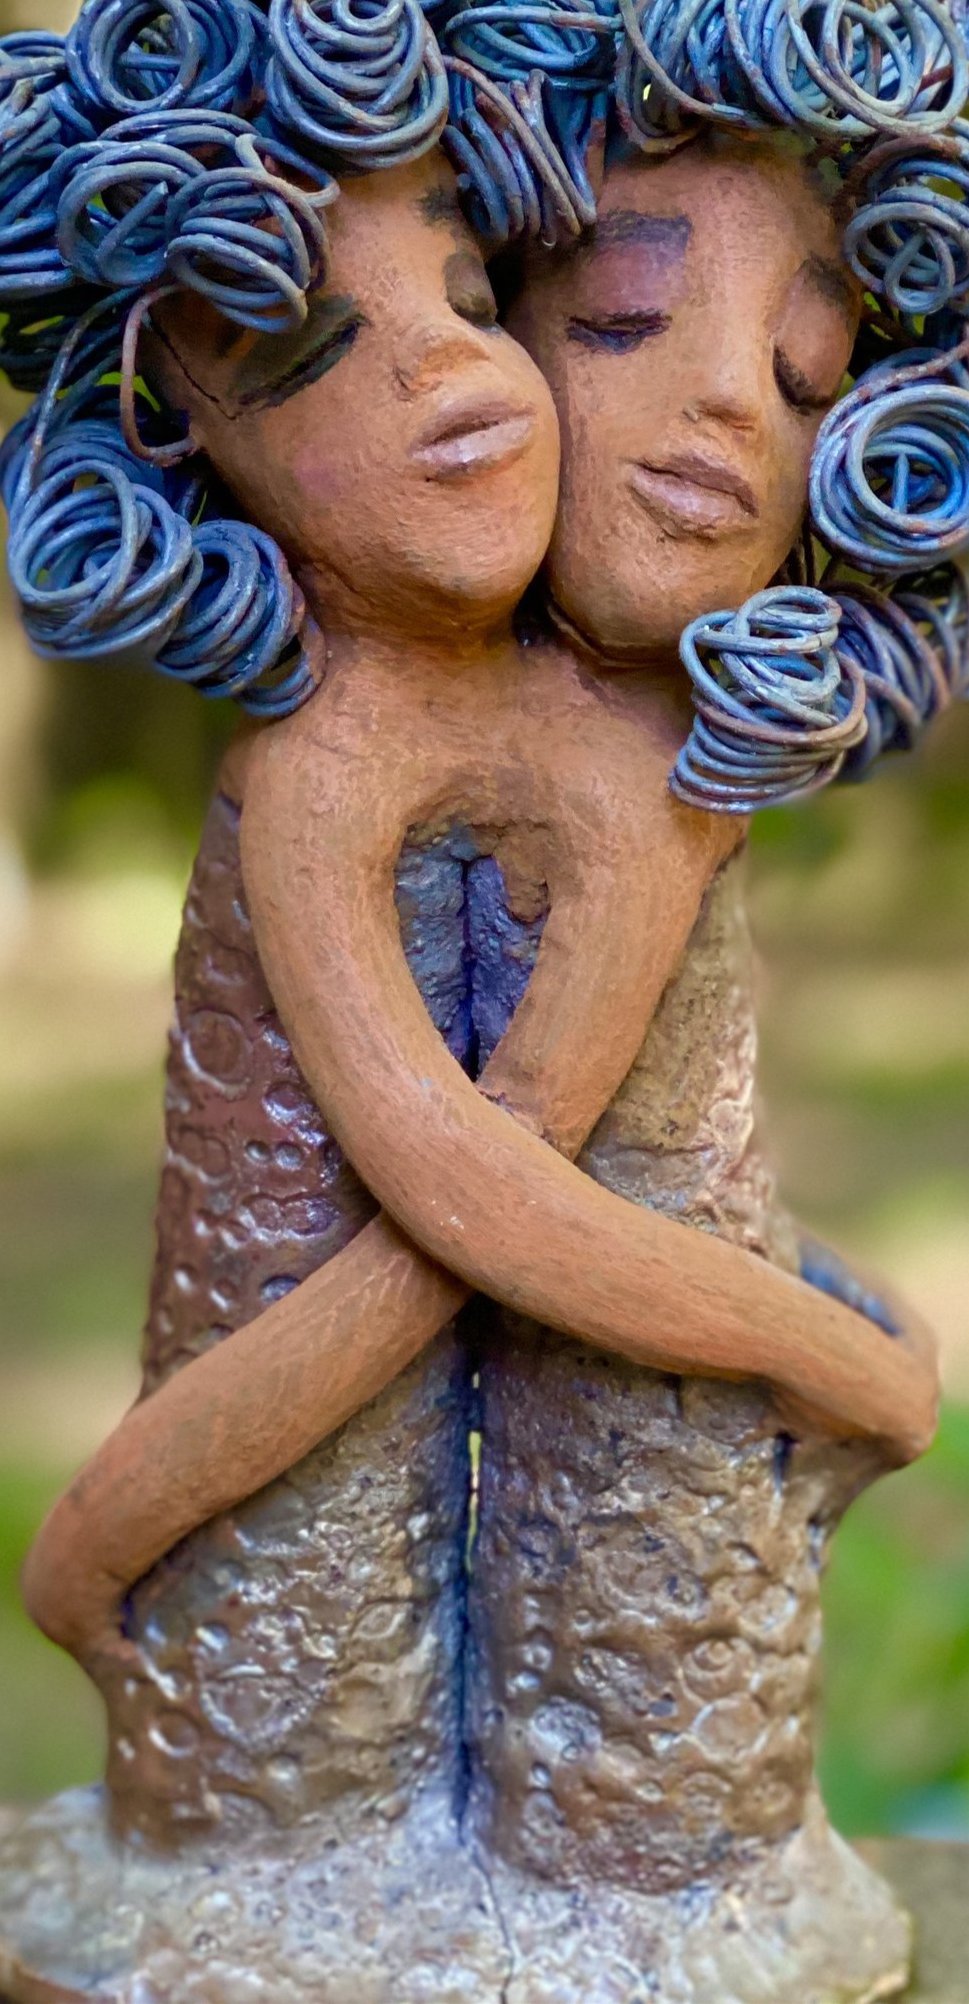 Sister Love is a raku fired sculpture. Raku is a specialized firing technique that involves high heat and open flames. Sister Love stands 11" x 5" x 3" and weighs 2.06 lbs﻿. Combined they have over 45 feet of curled 16 gauge wire hair. The dresses are textured with an antique copper glaze. They have lovely honey brown complexions and long loving arms. Sister Love is inseparable! Give them a special place in your home. Free Shipping!